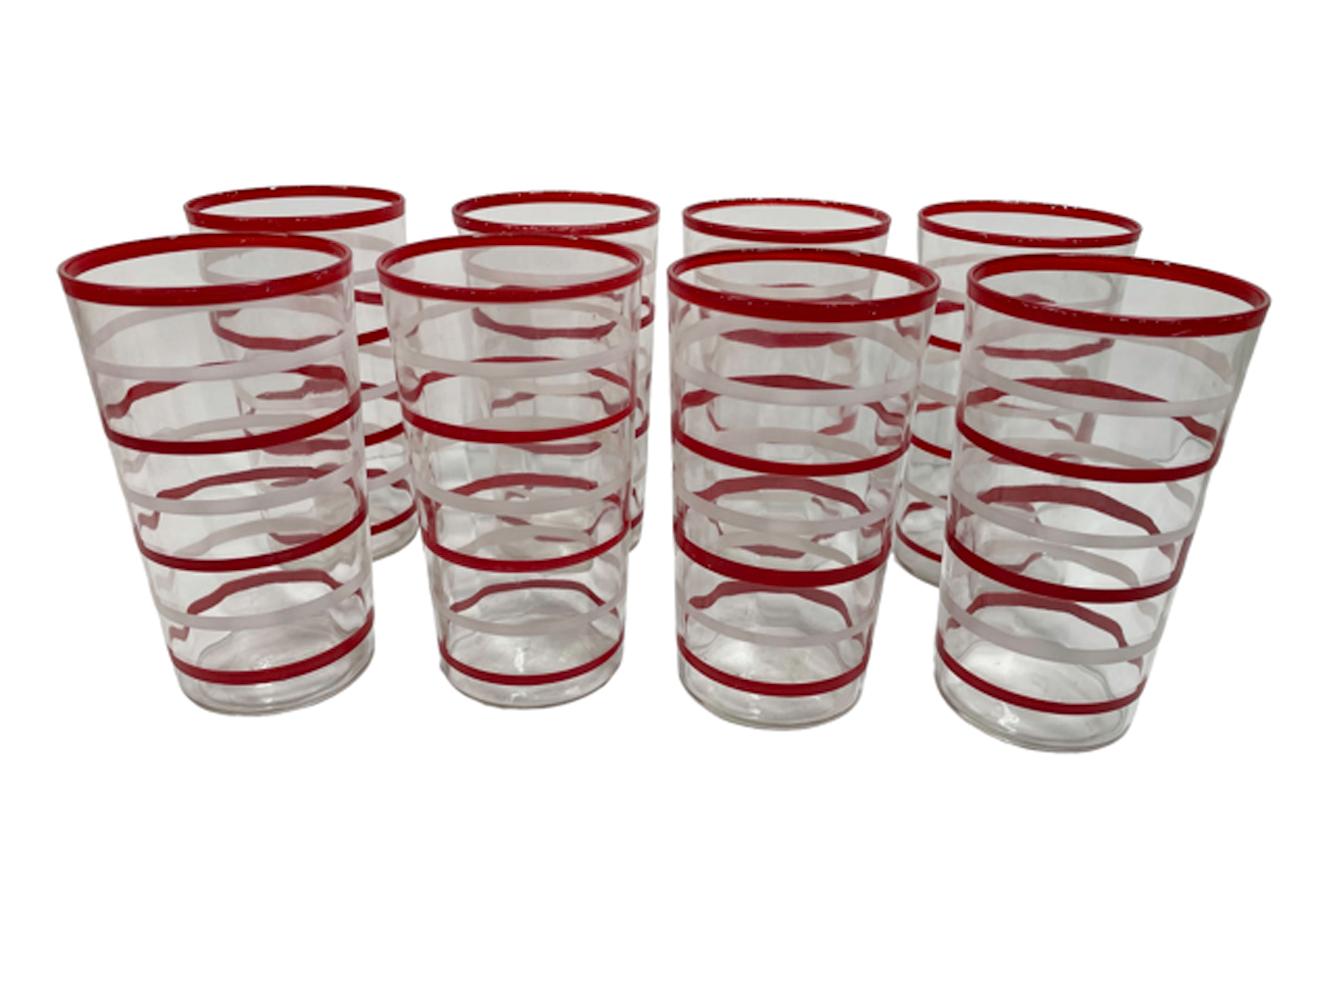 Fifteen piece hand painted Art Deco cocktail shaker and glasses. A large ring-molded tapered shaker with aluminum top along with eight highball glass and six cocktail glasses all with hand painted red and white rings.